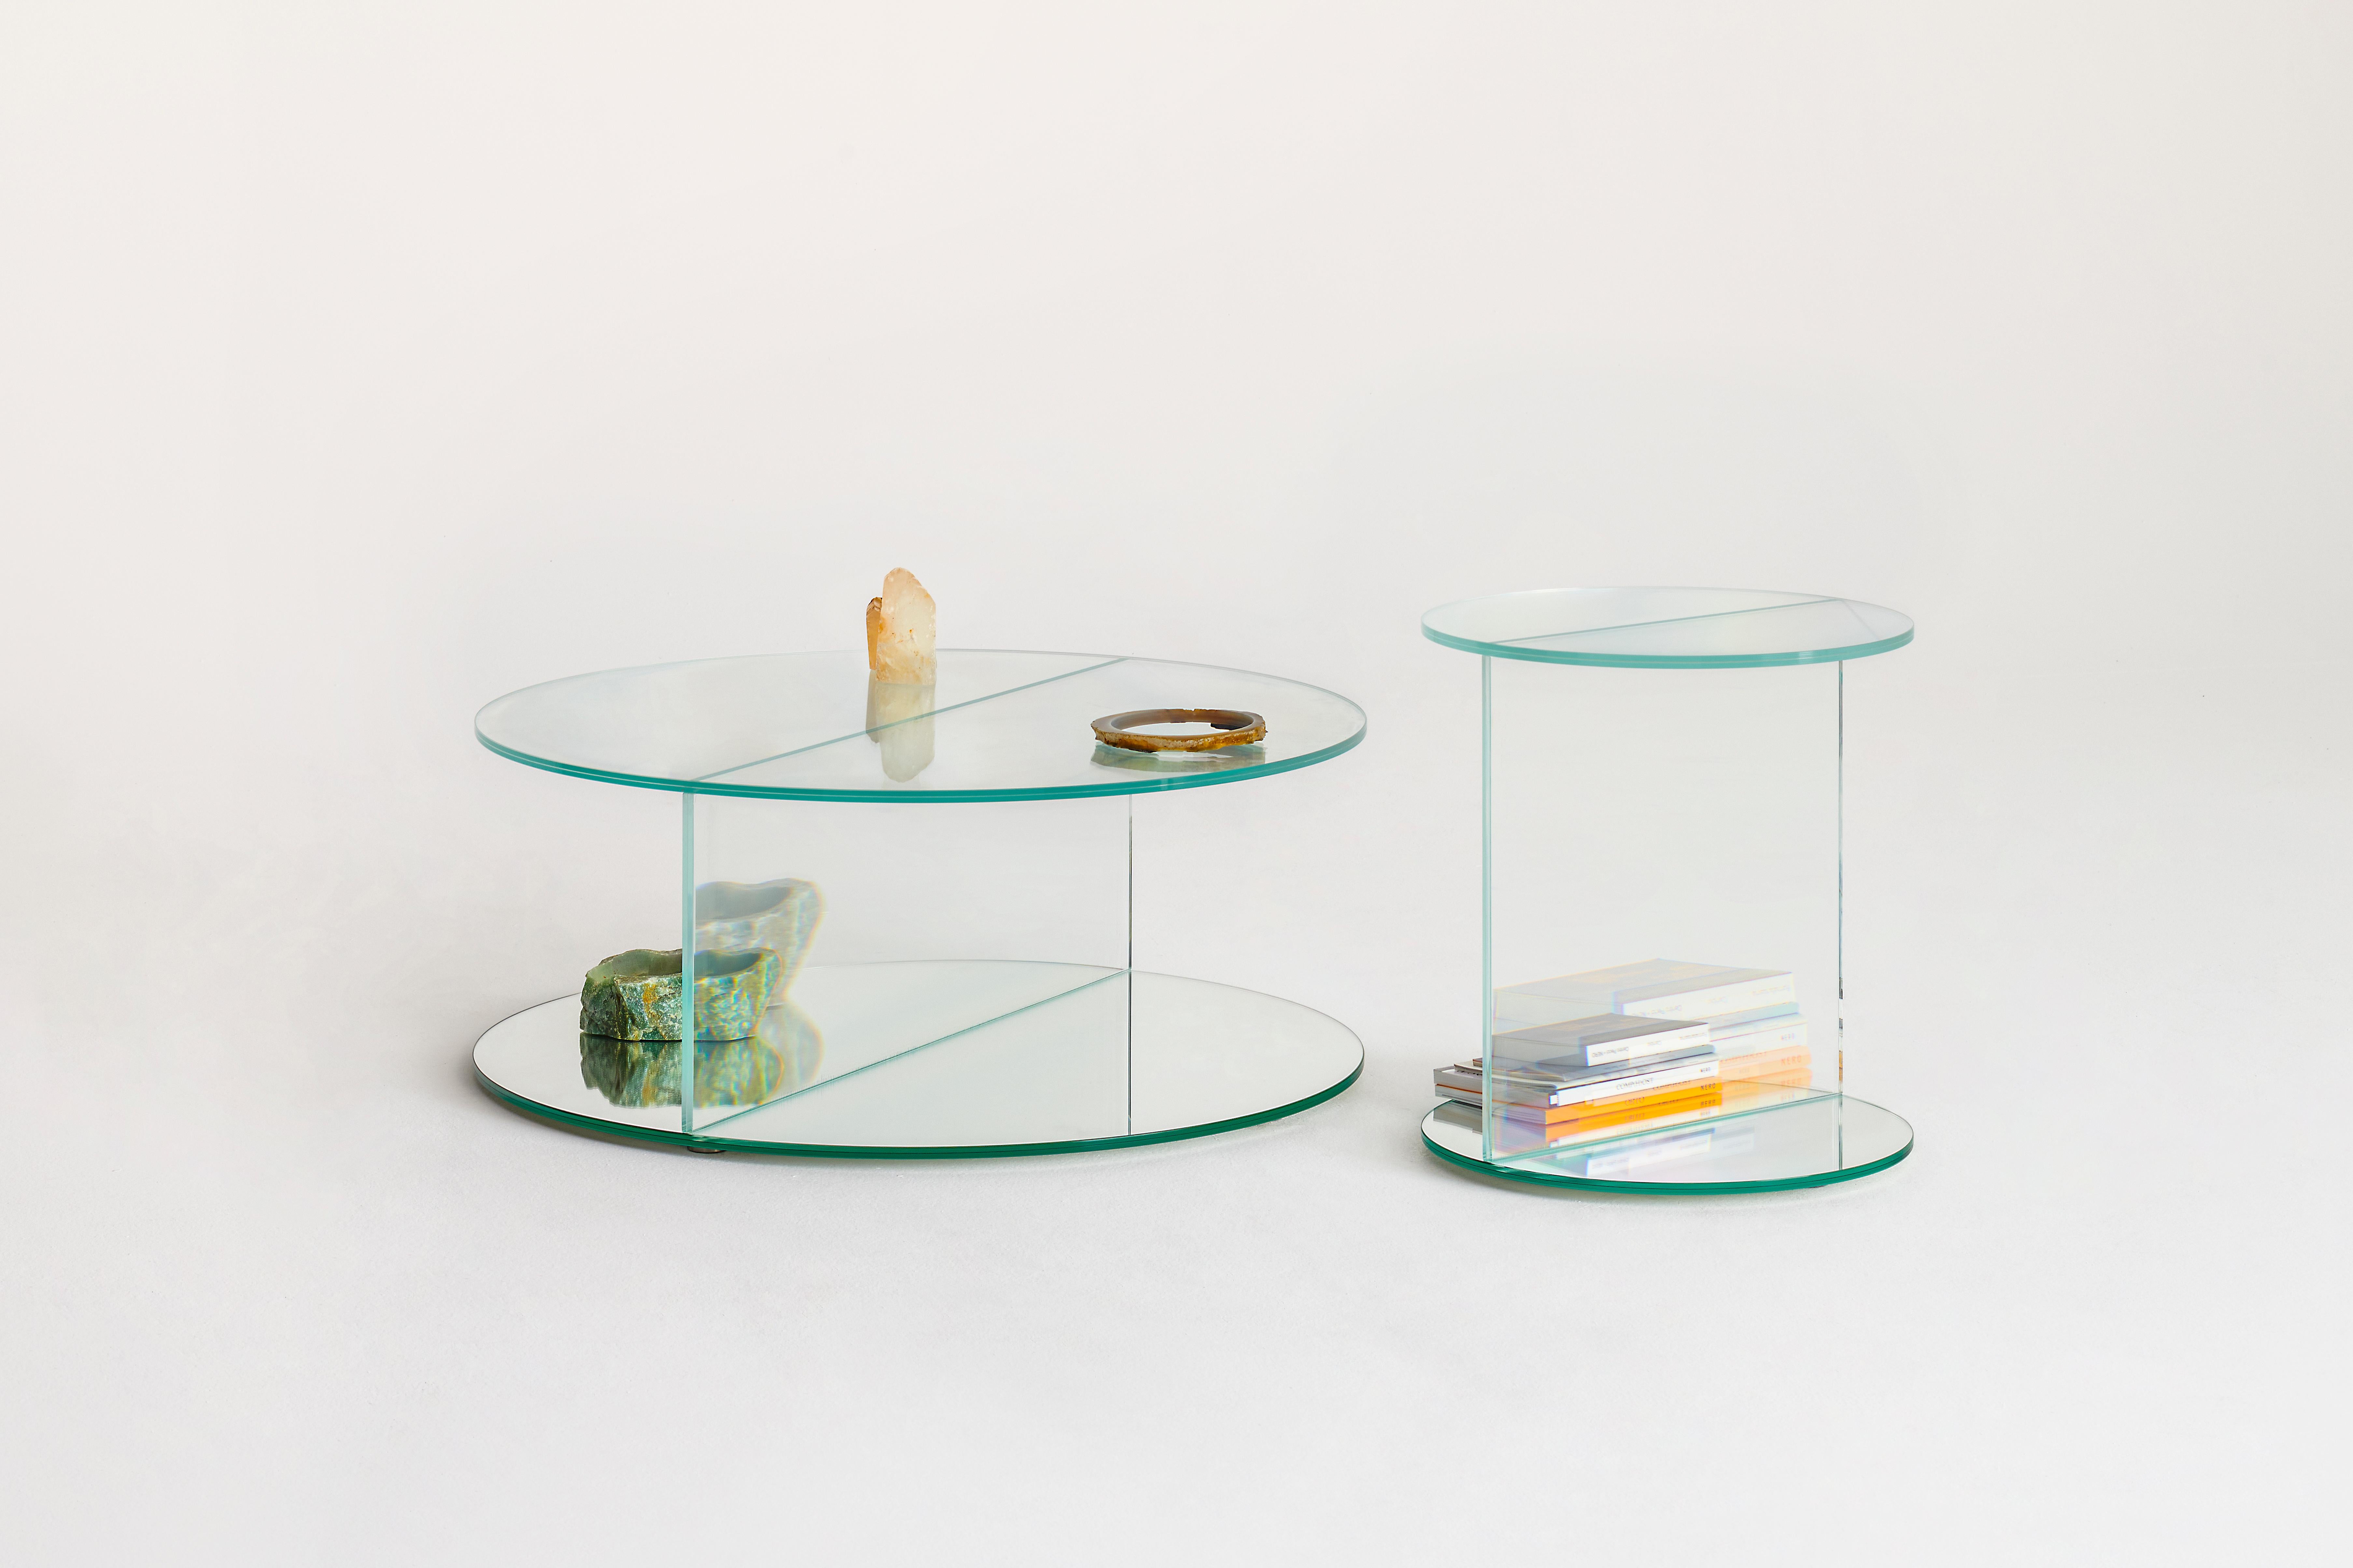 Collection of low tables, storage units and console with a square or round shape made with an innovative laminated glass which creates extraordinary optical illusions and wonderful surreal effects.
The objects contained inside these storage units